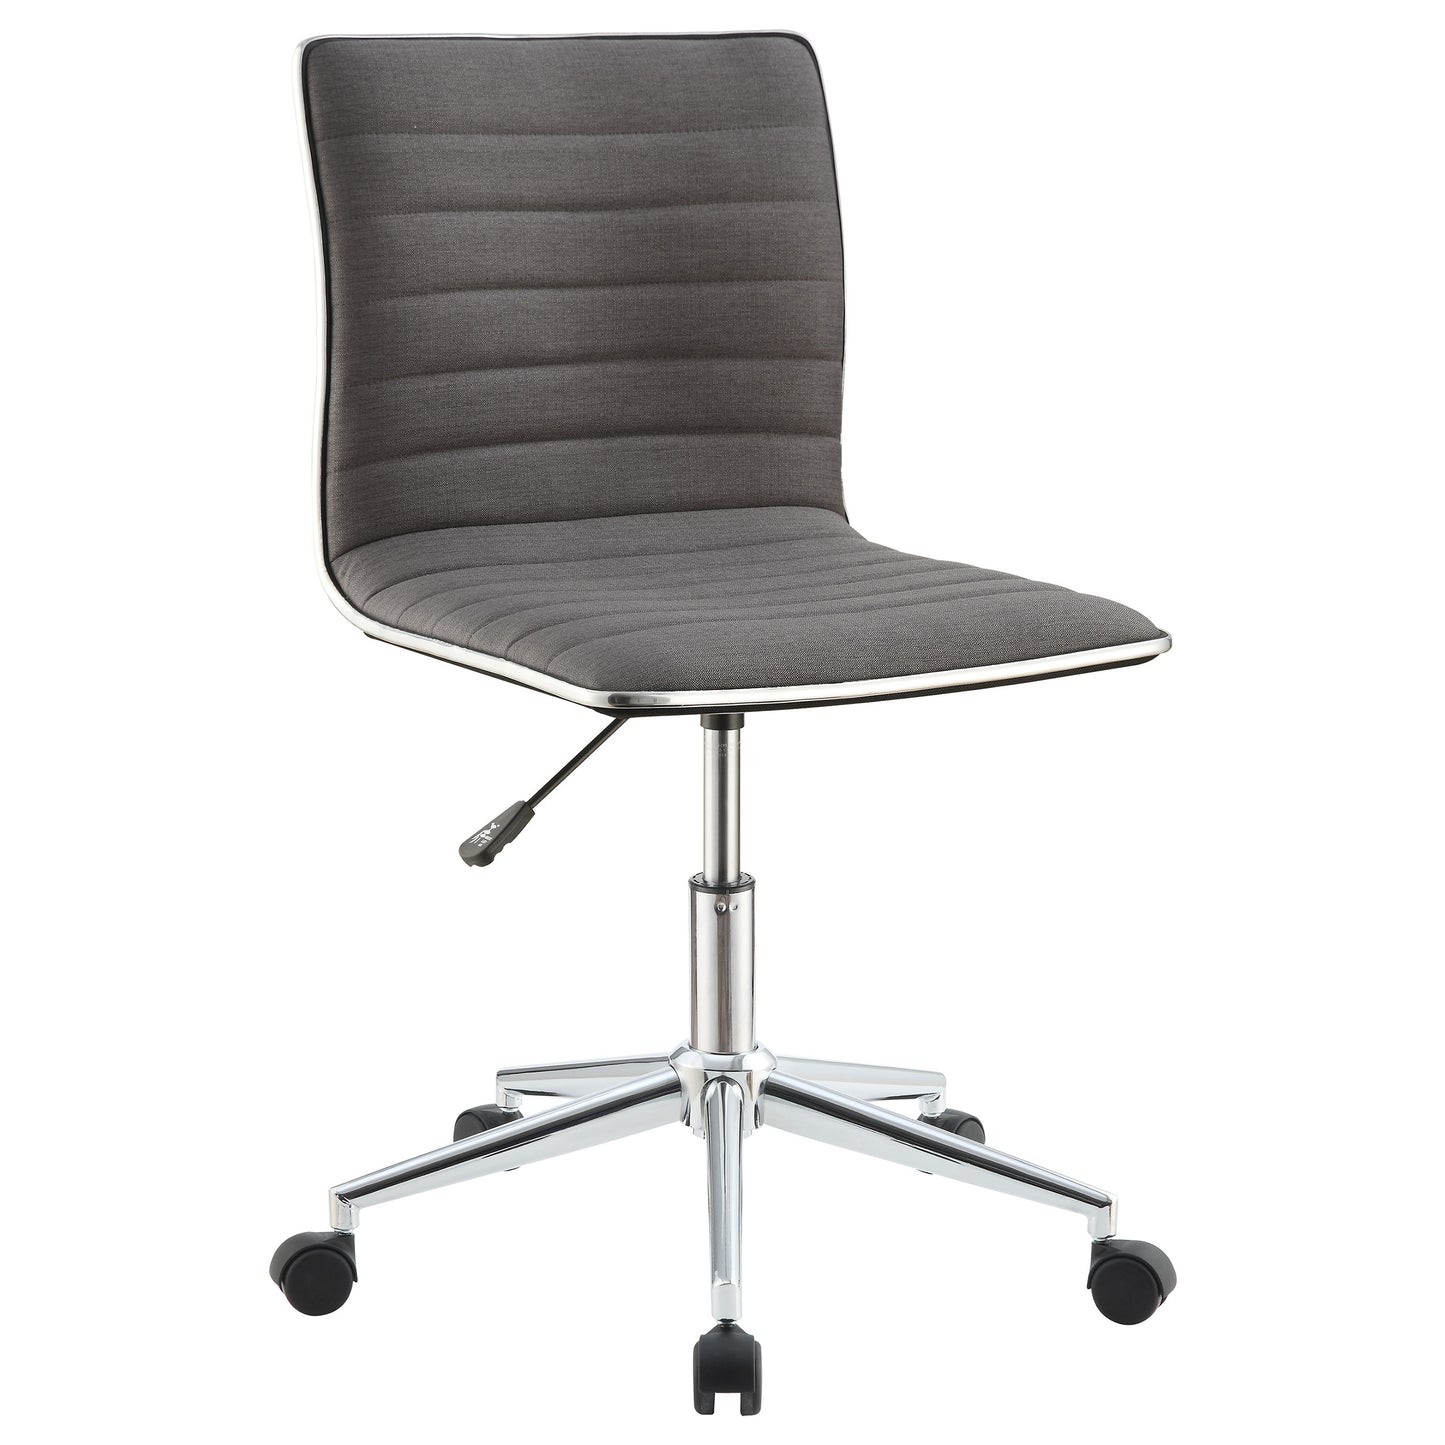 Chryses Adjustable Height Office Chair Grey and Chrome